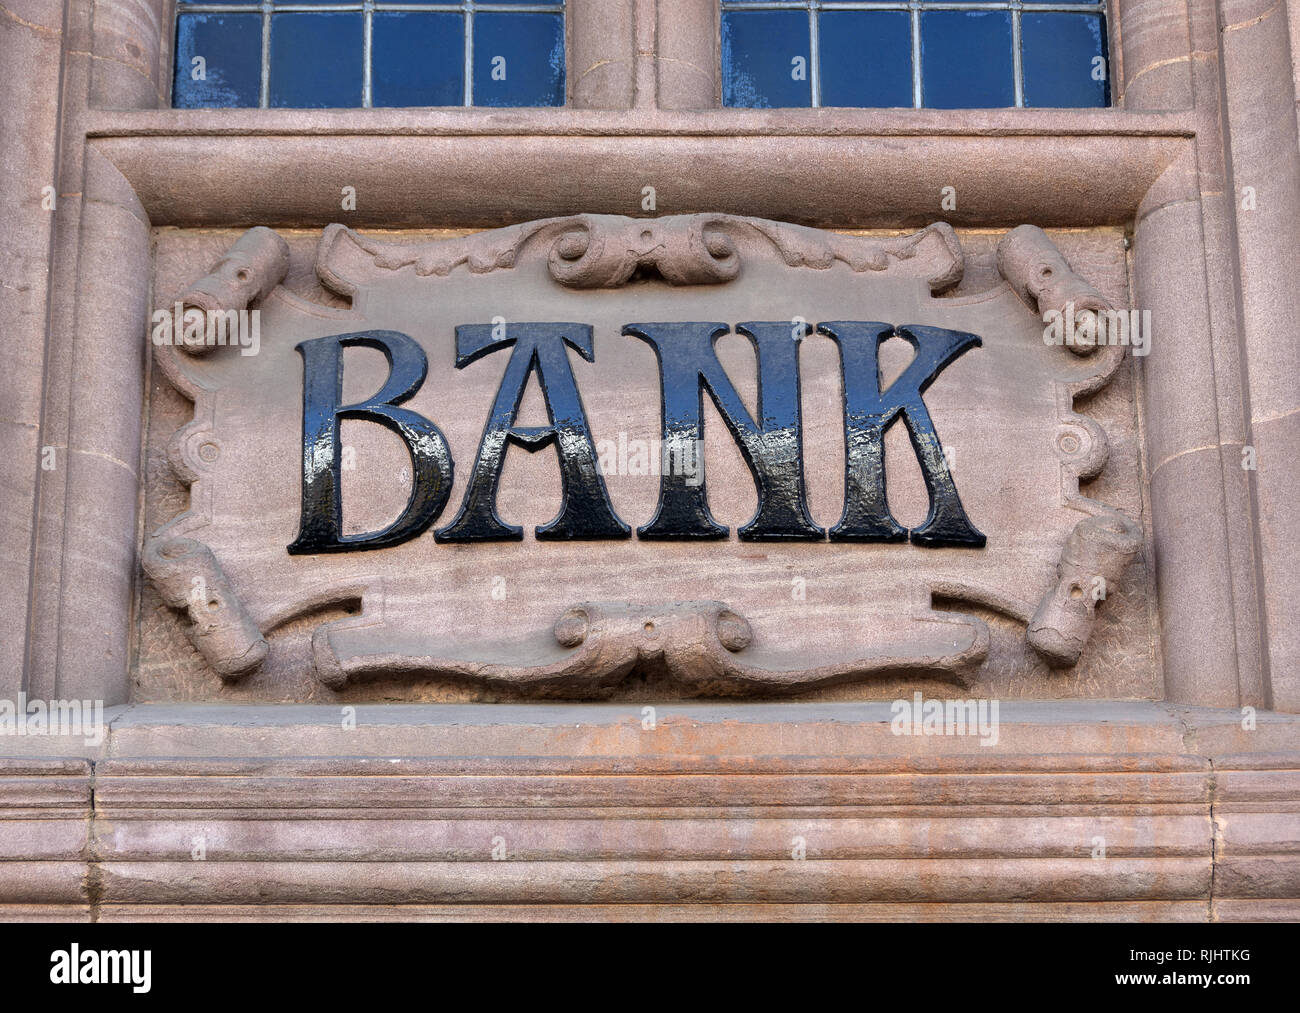 Stone carving of the word bank on the exterior of building Stock Photo